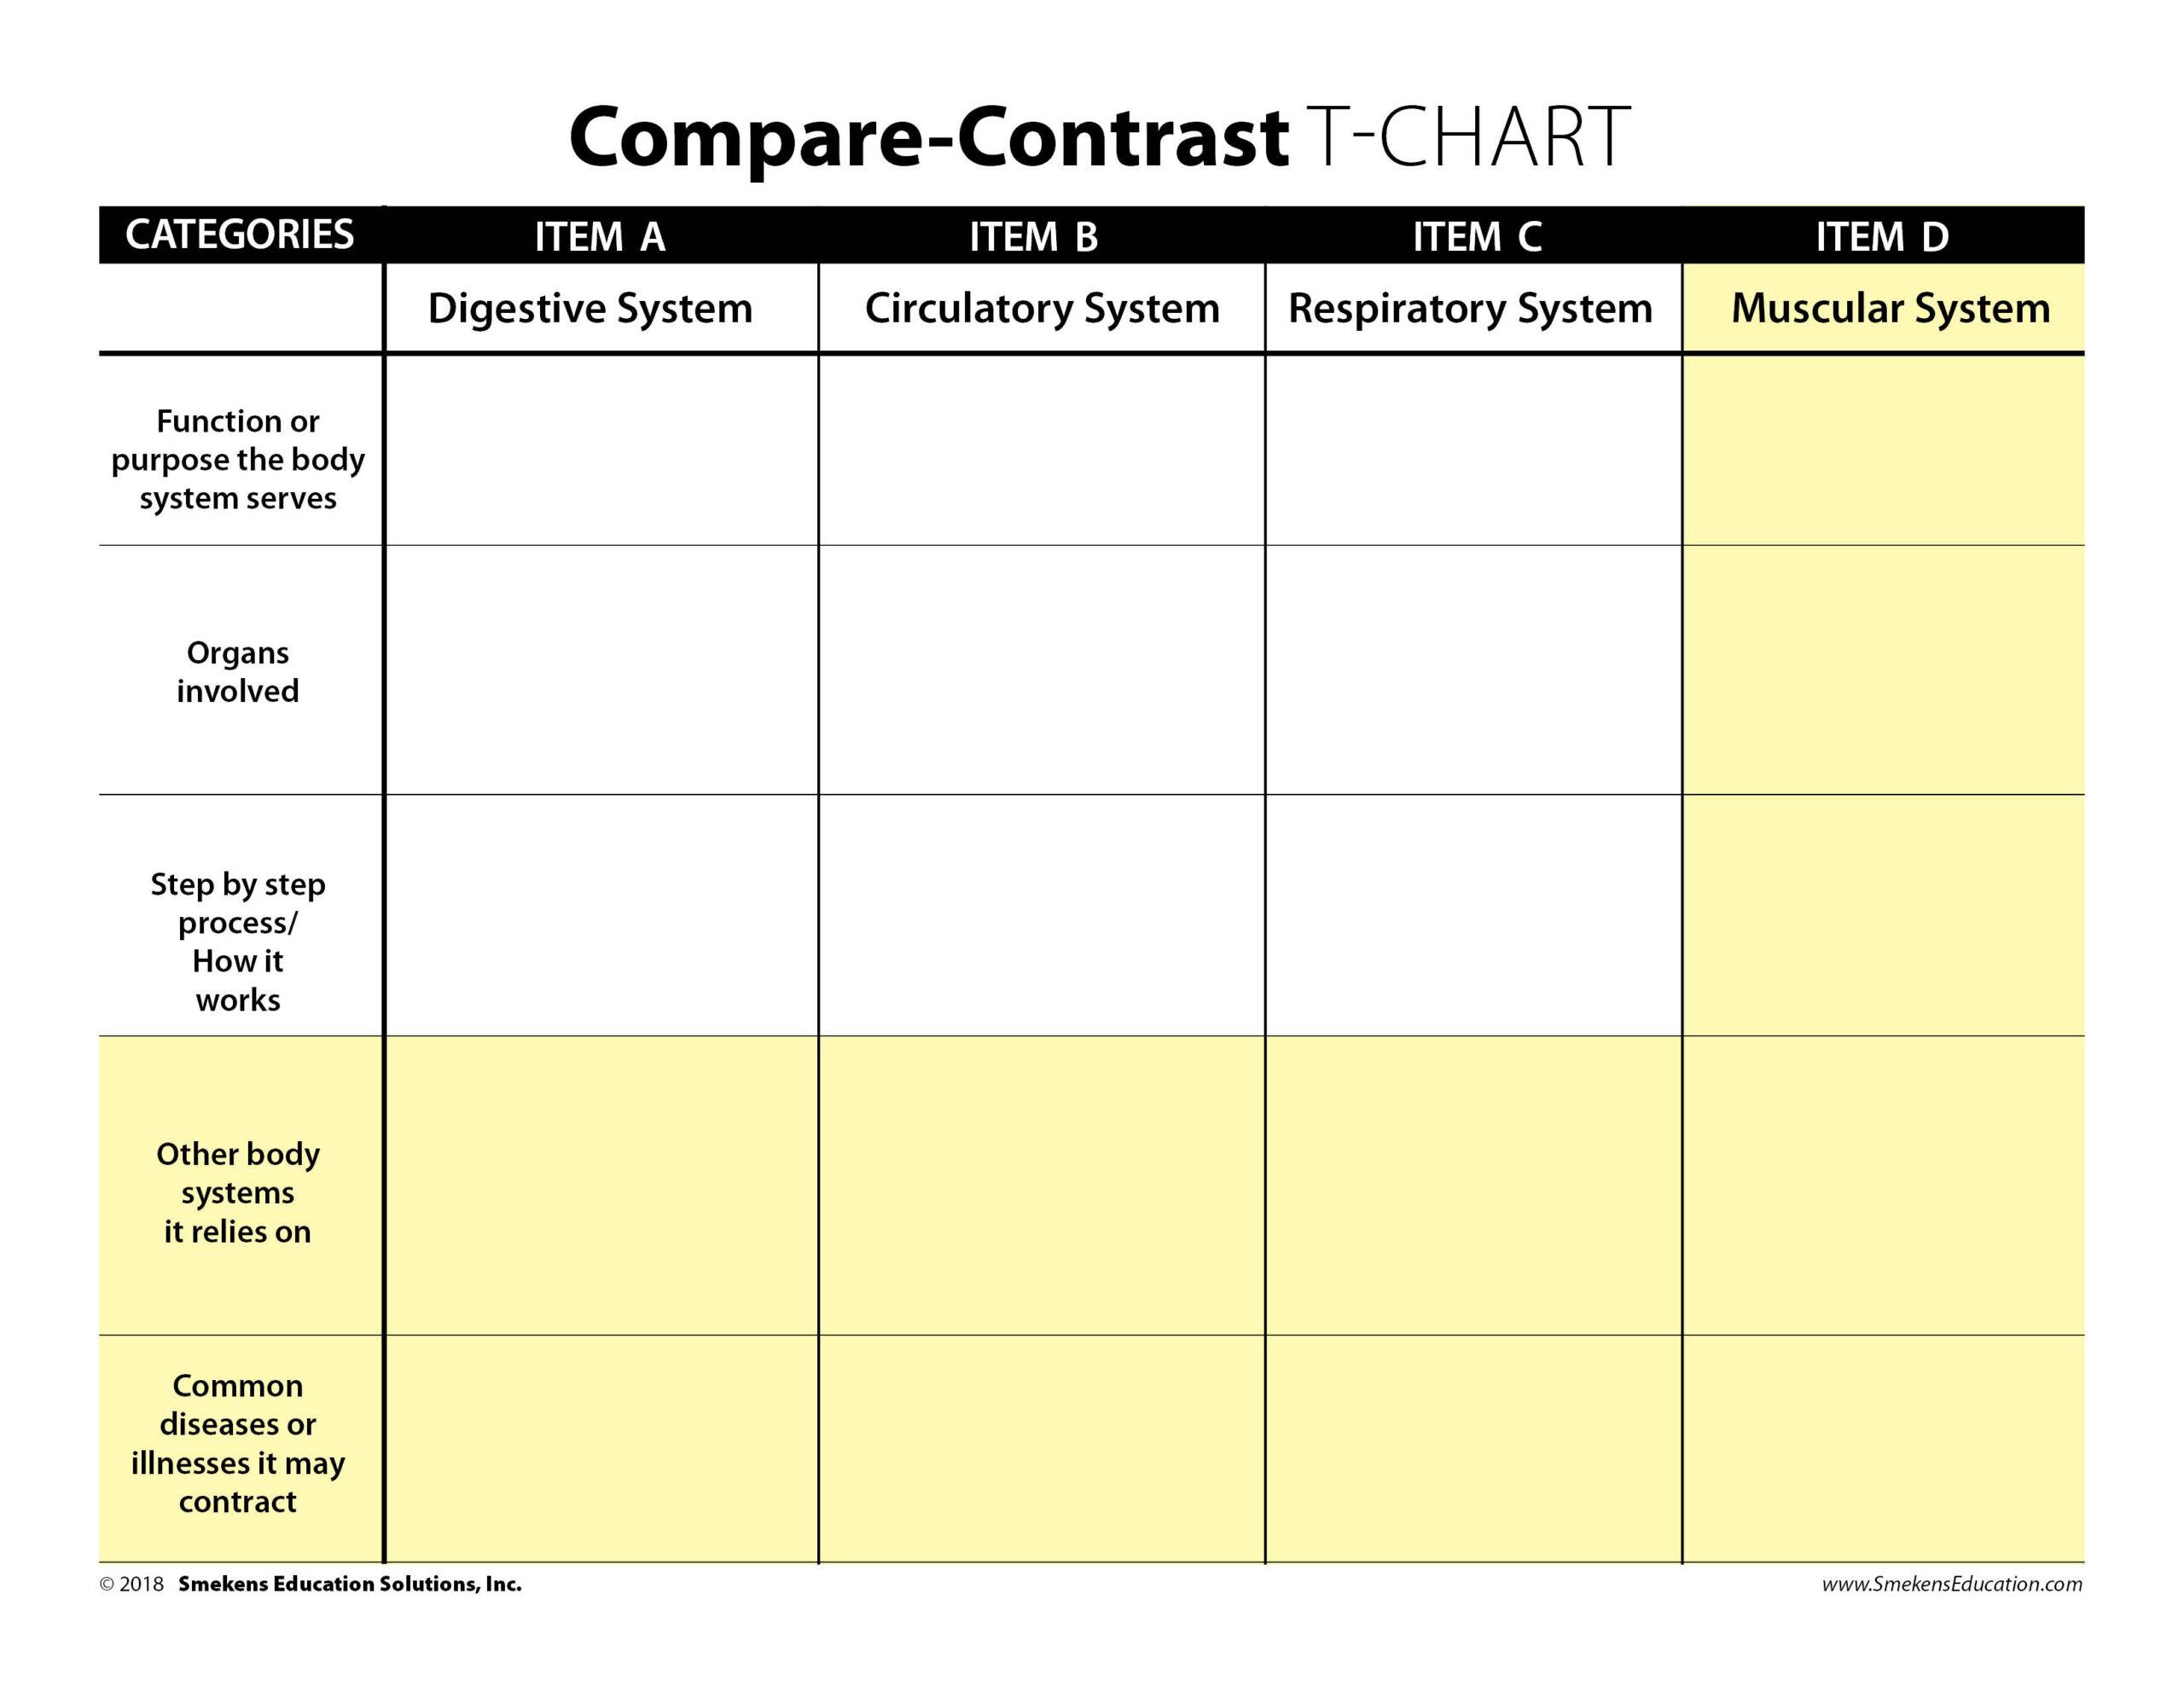 Compare-Contrast T-Chart Body Systems 4 x 5